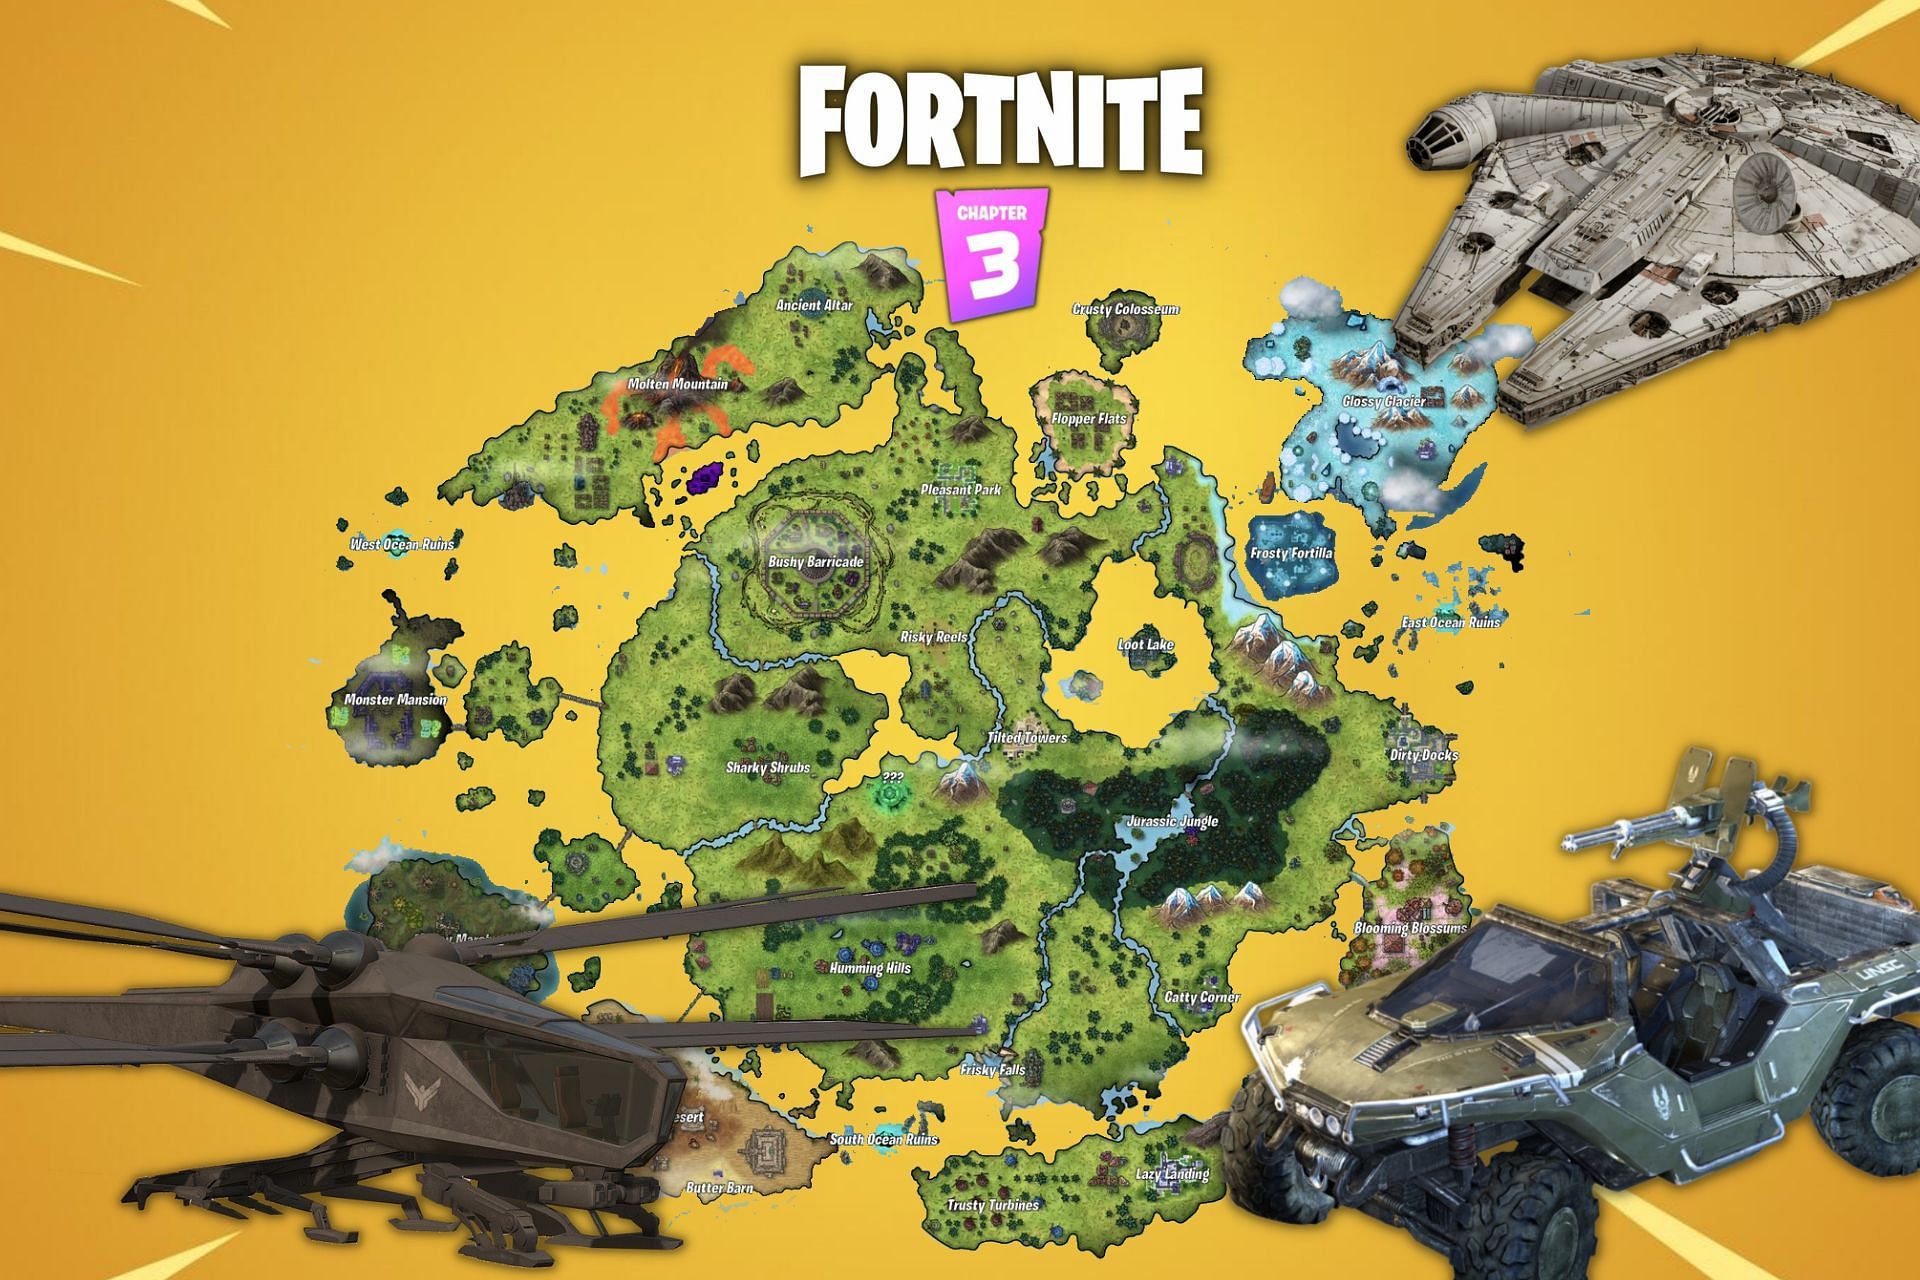 Top 5 vehicles that would fit perfectly into Fortnite Chapter 3 (Image via Sportskeeda)